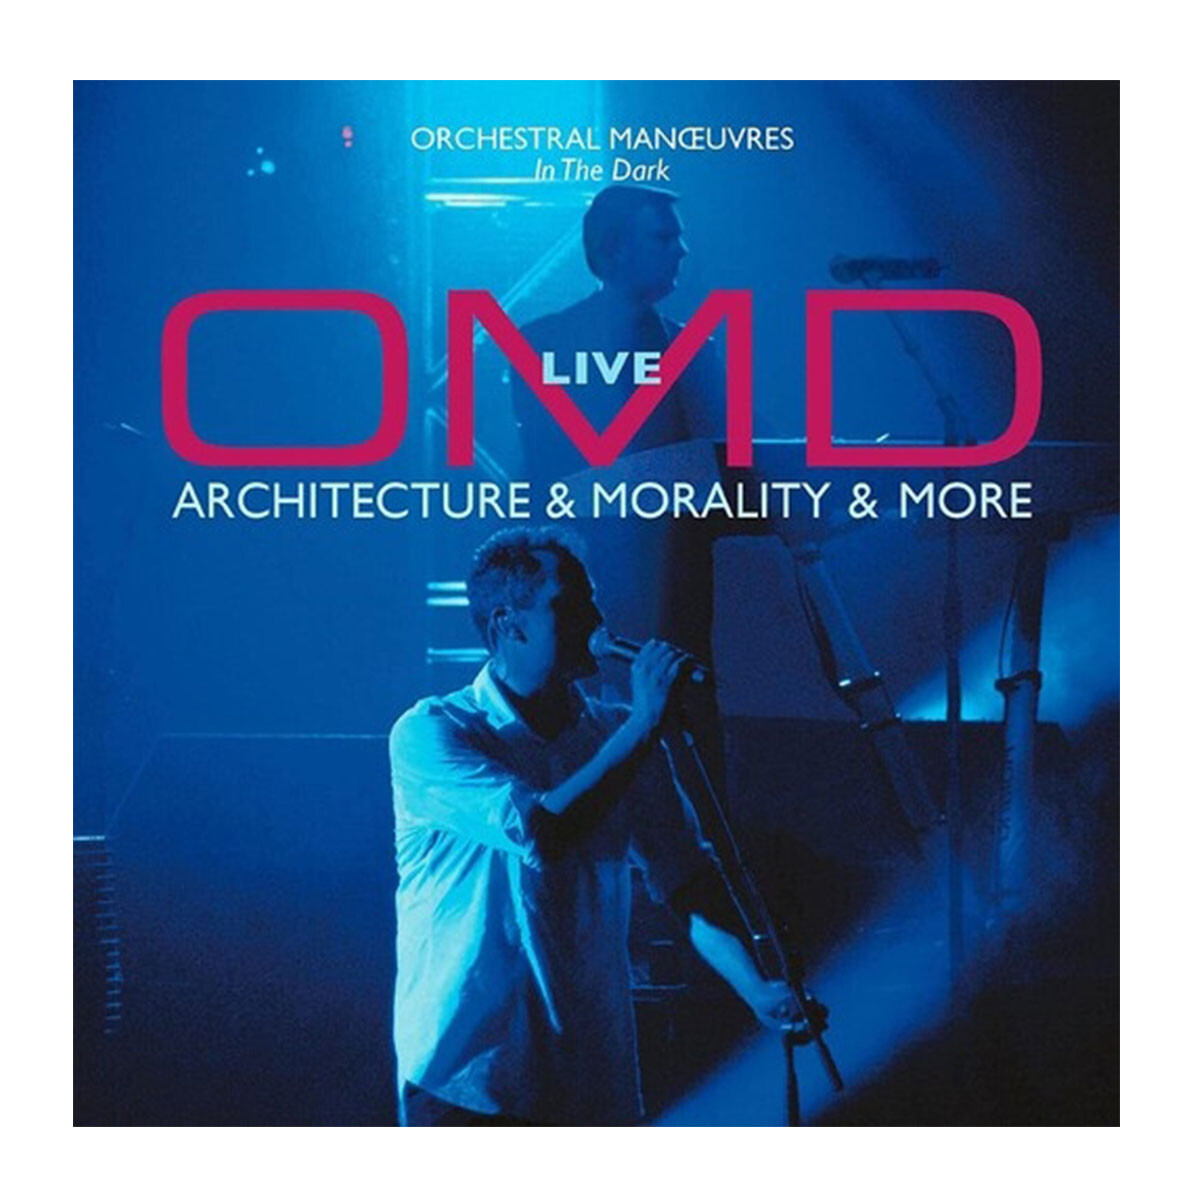 Orchestral Manoeuvres In The Dark - Omd Live - Architecture & Morality & More - Vinilo 